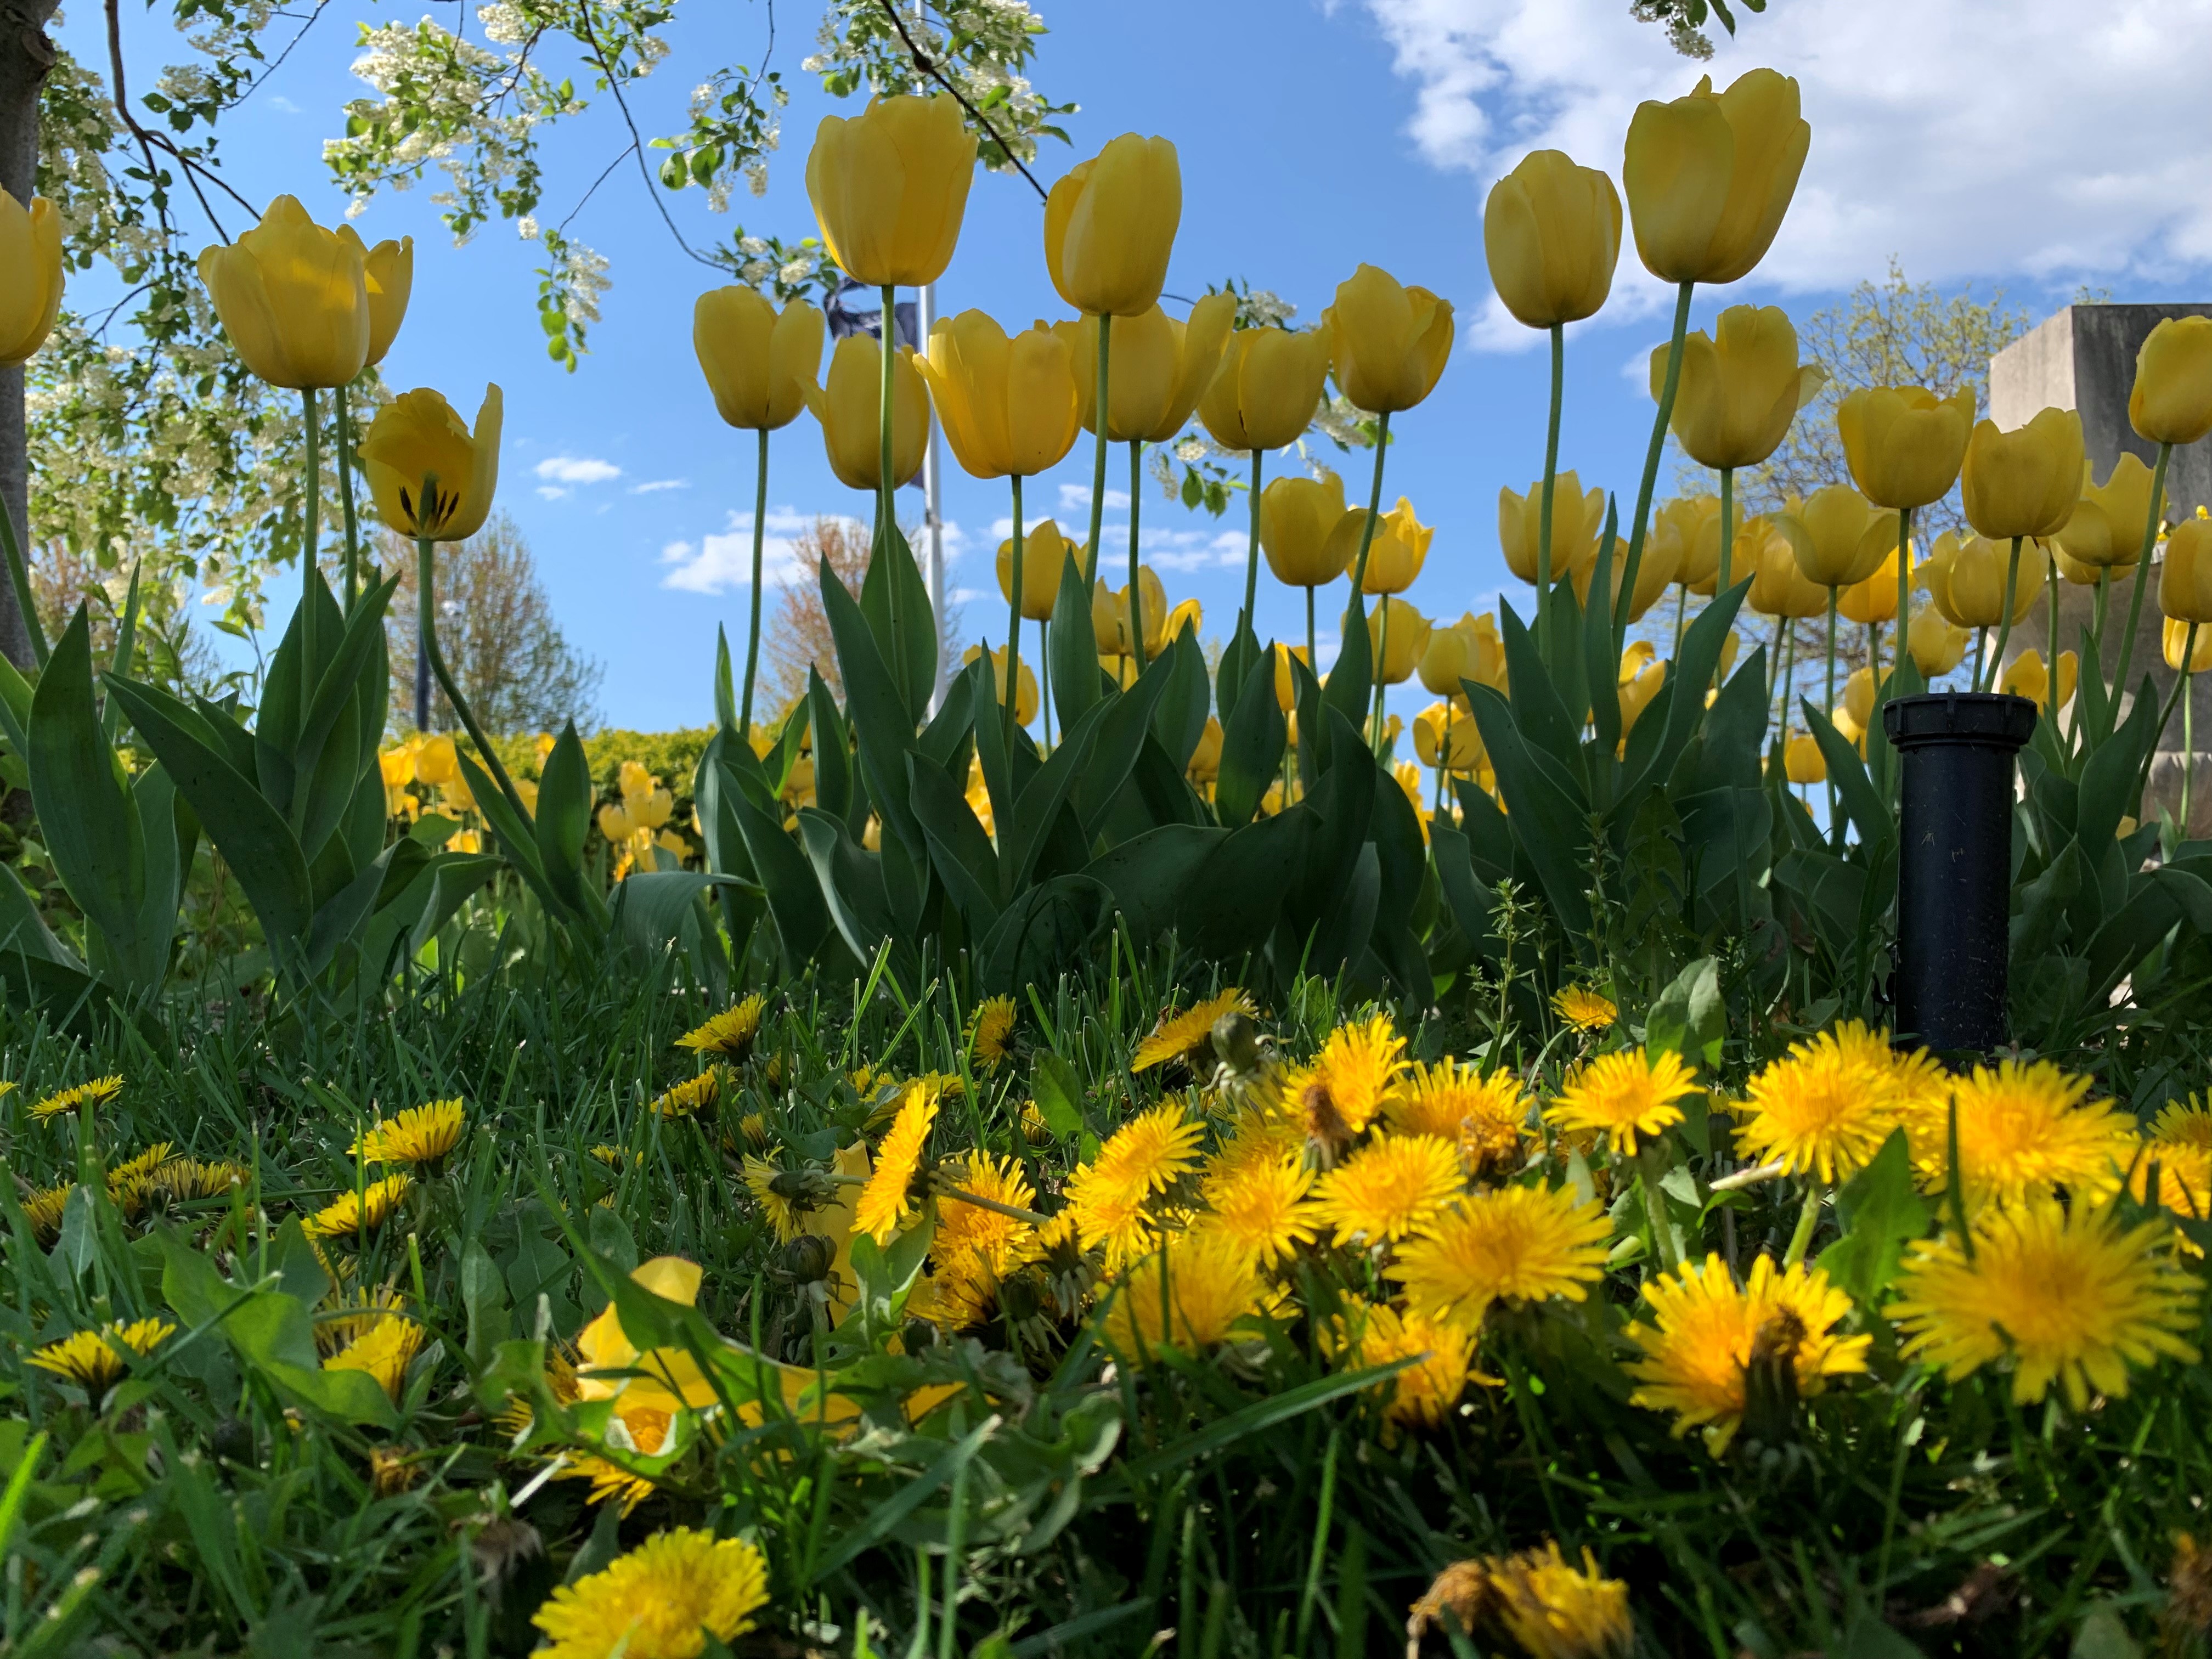 Image of yellow tulips with green stems